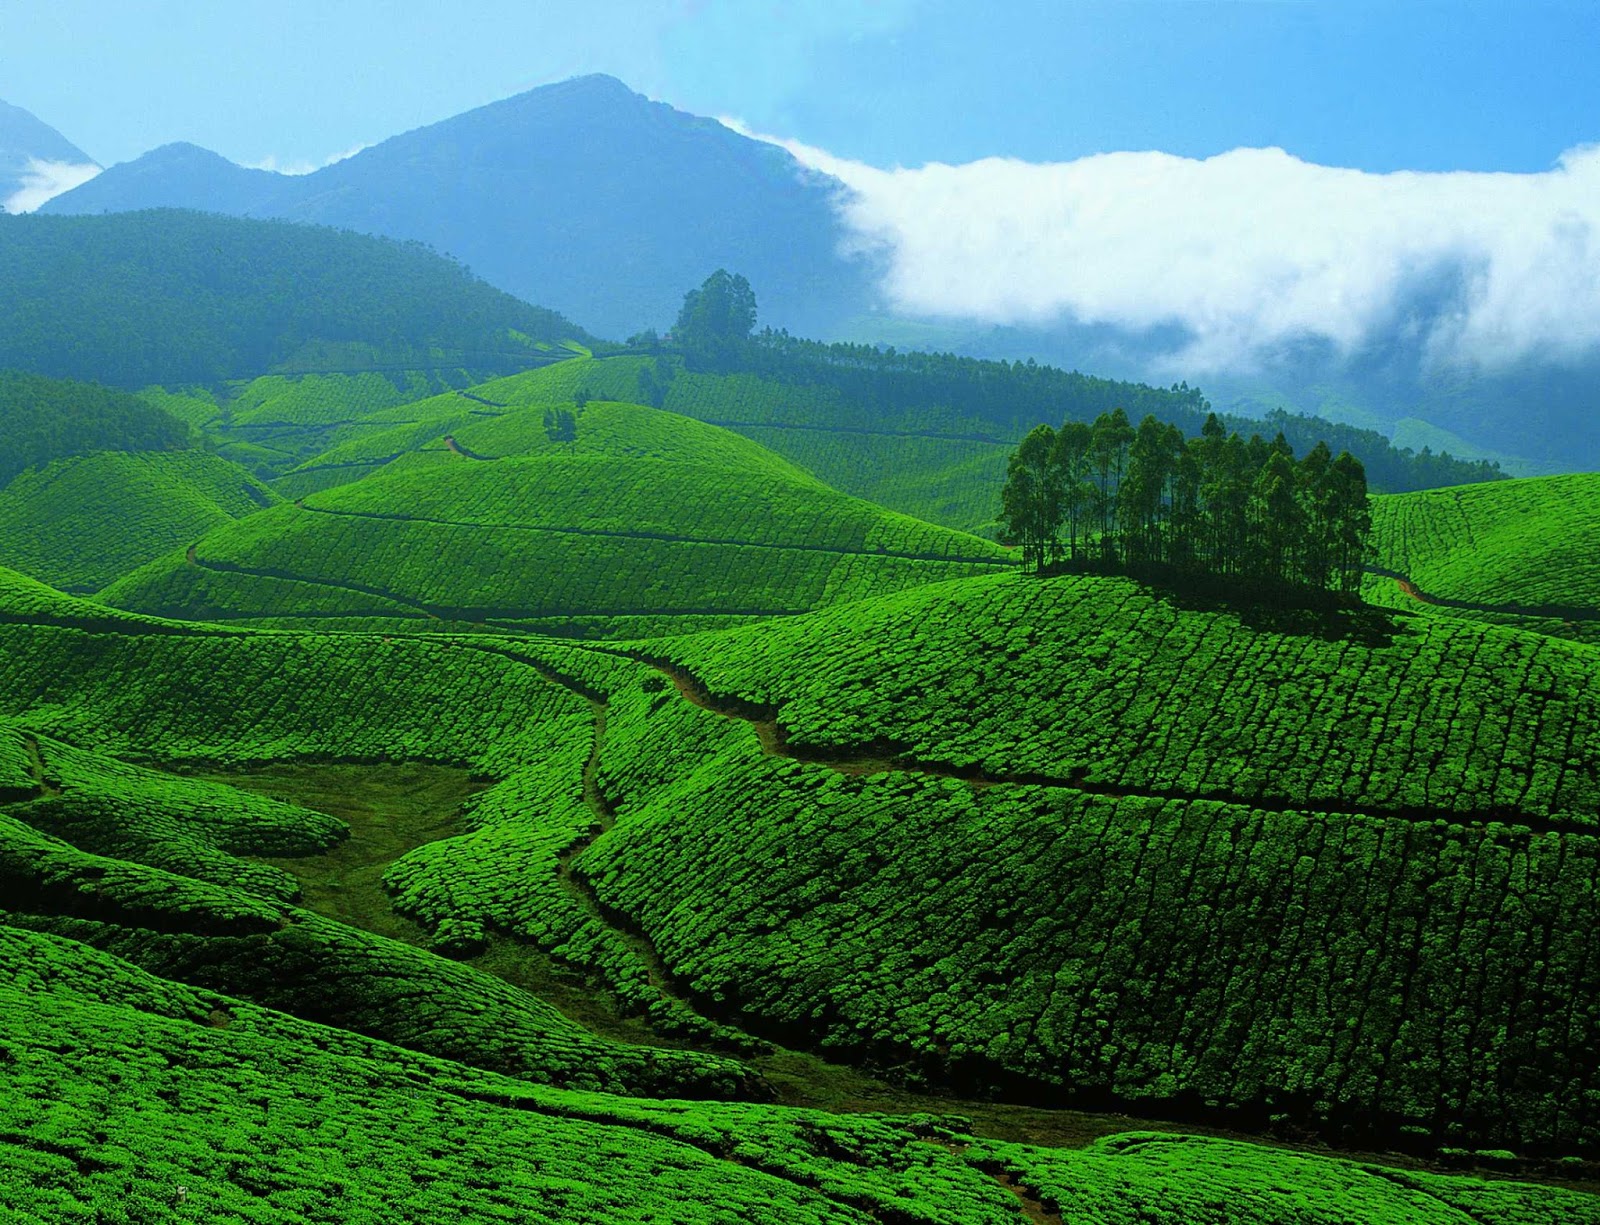 How to Plan a Short Trip to Munnar